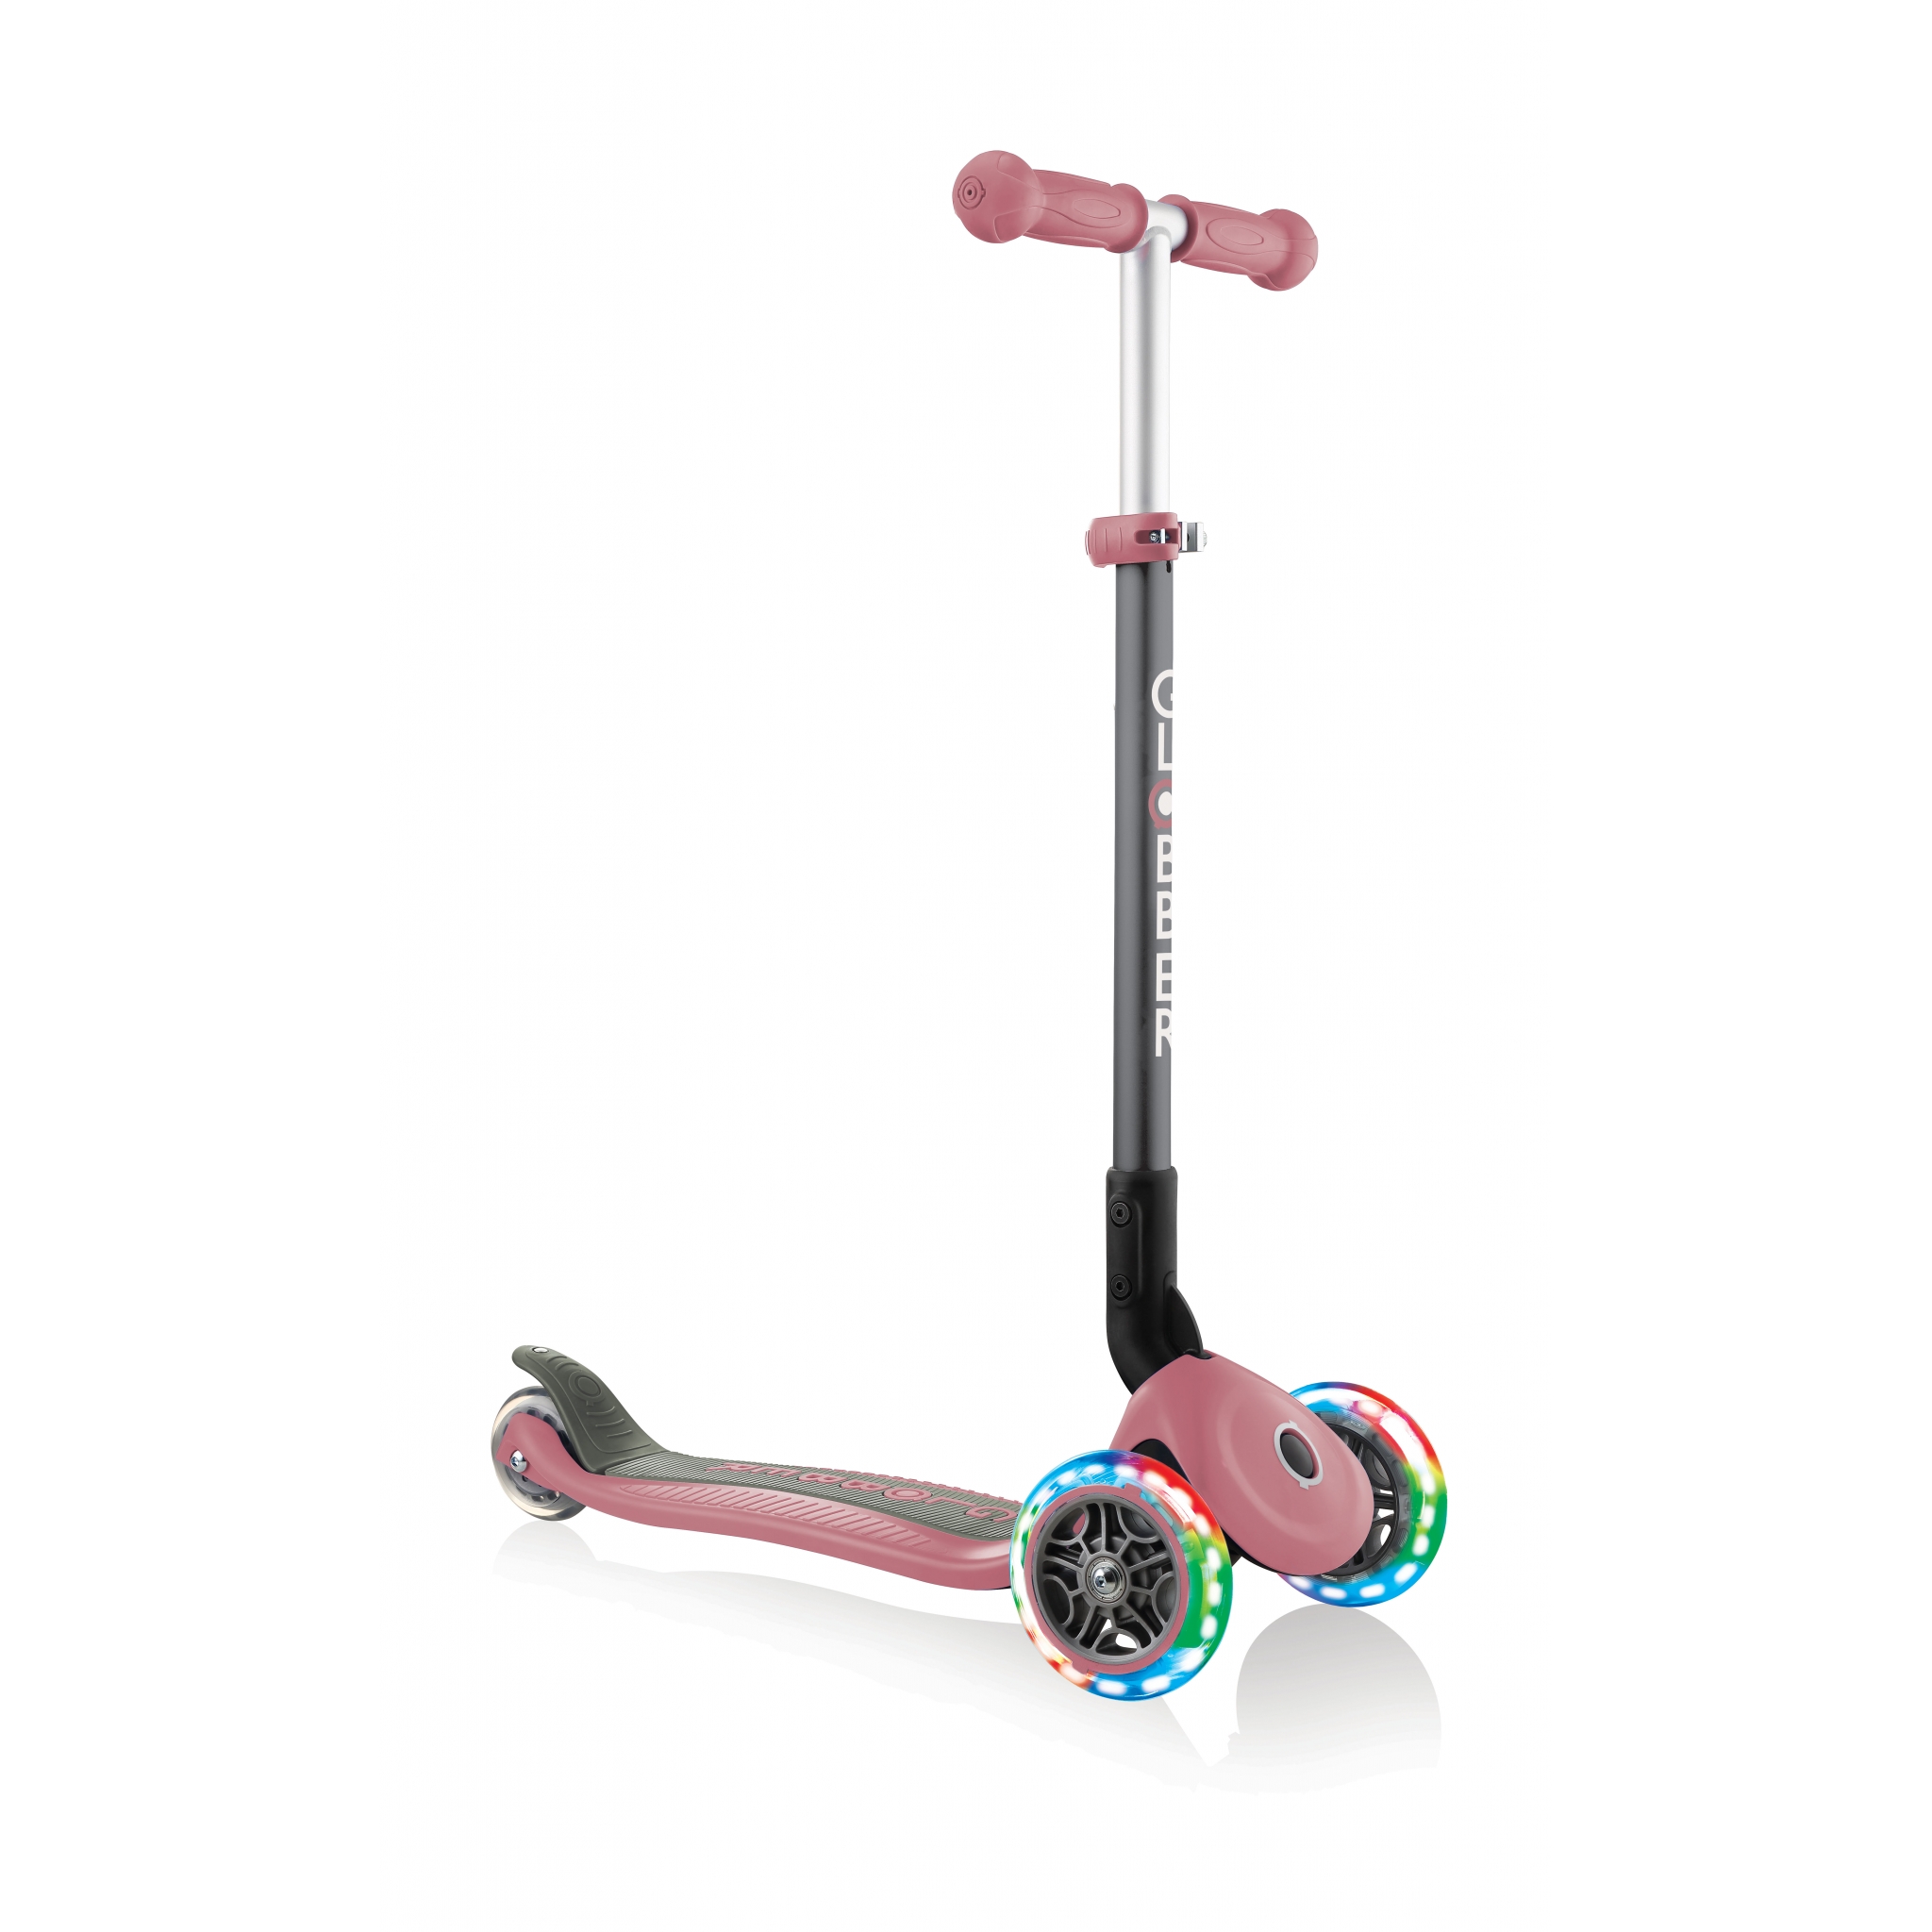 PRIMO-FOLDABLE-LIGHTS-3-wheel-foldable-scooter-light-up-scooter-for-kids-pastel-deep-pink 4